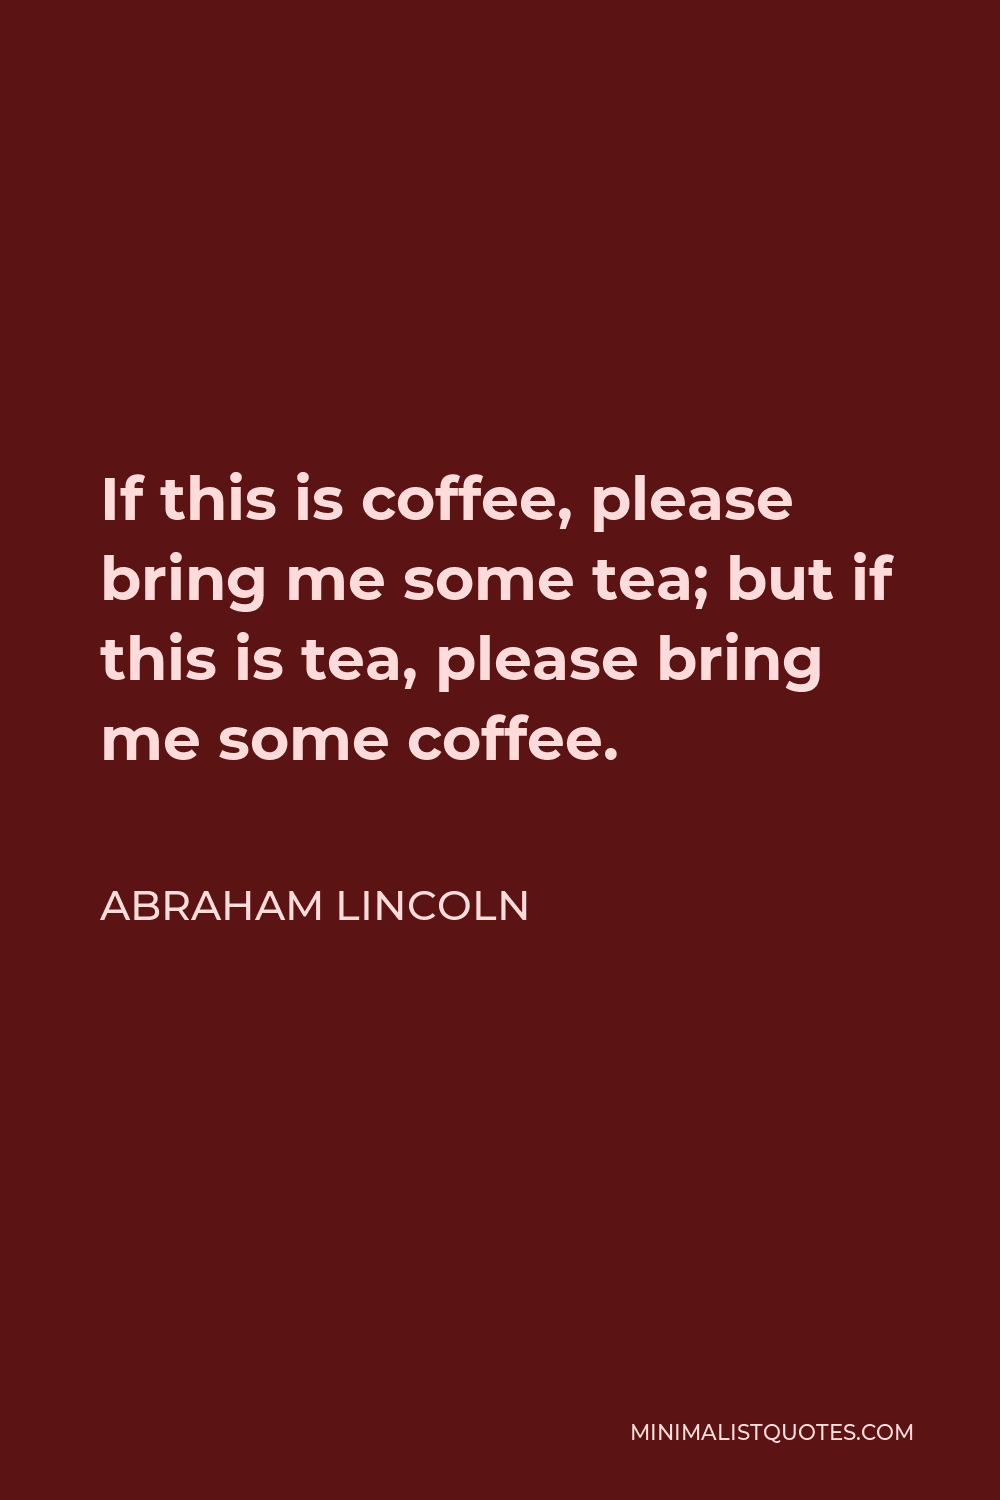 Abraham Lincoln Quote - If this is coffee, please bring me some tea; but if this is tea, please bring me some coffee.